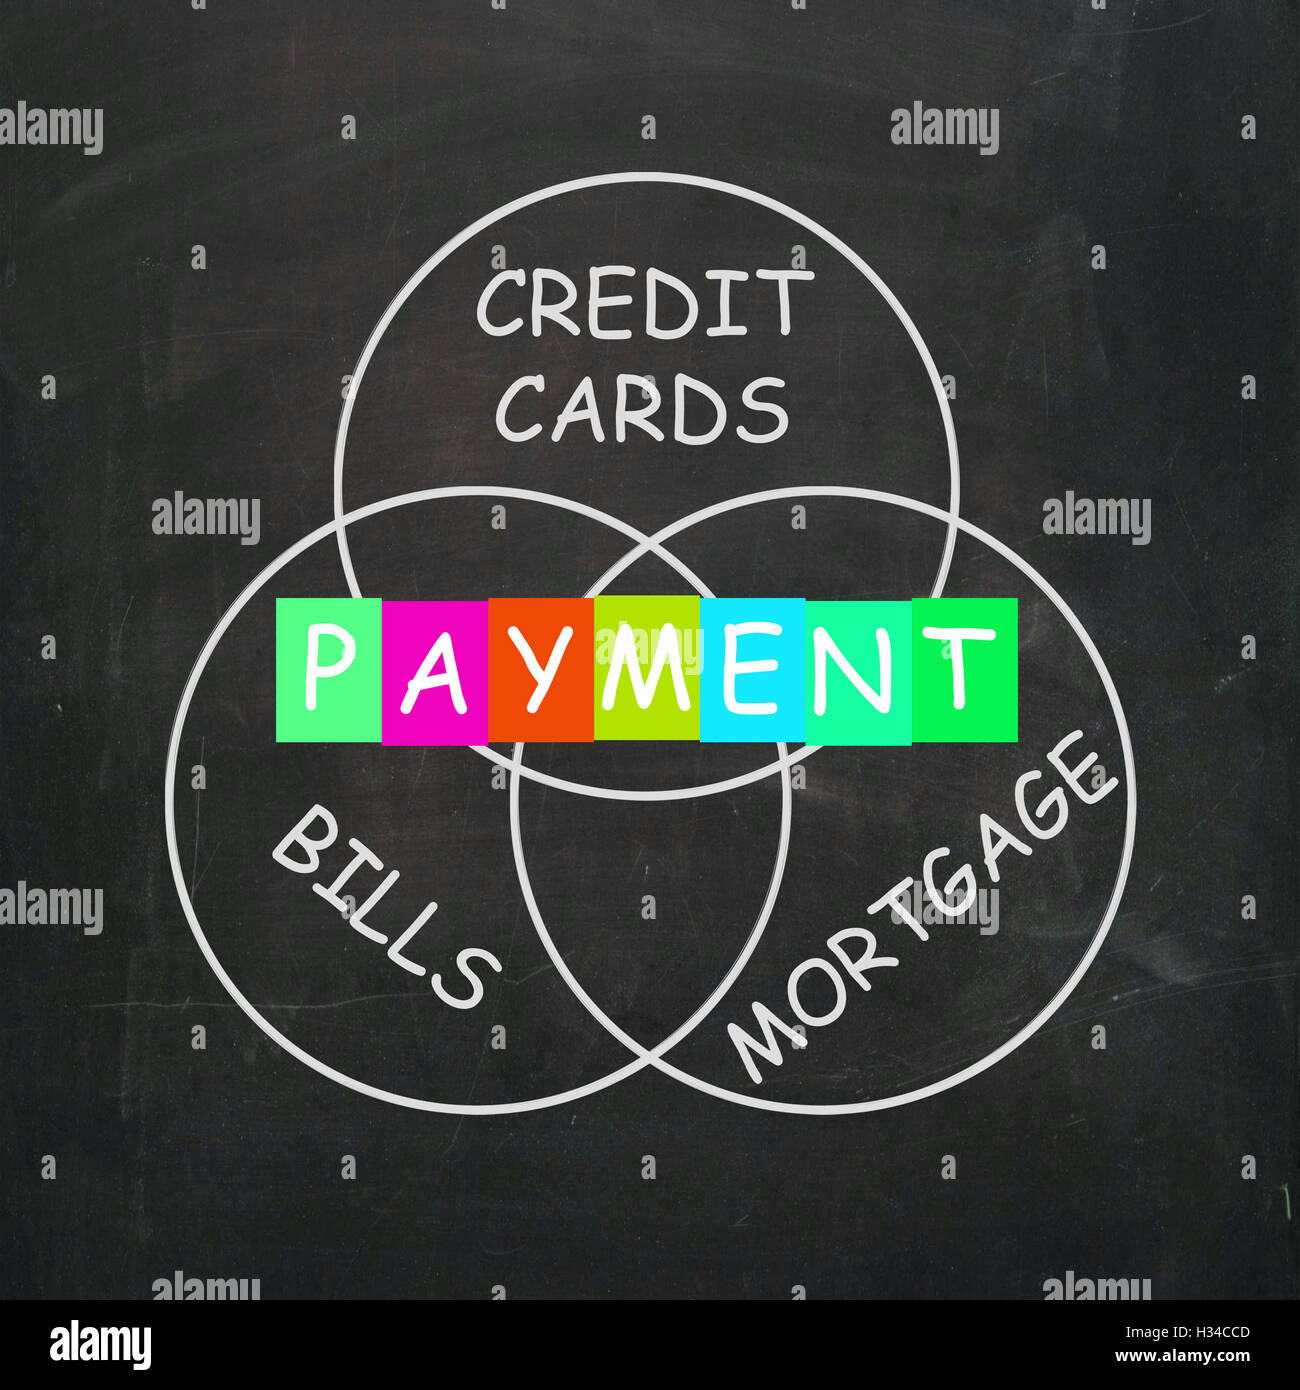 Consumer Words Show Payment of Bills Mortgage and Credit Cards Stock Photo